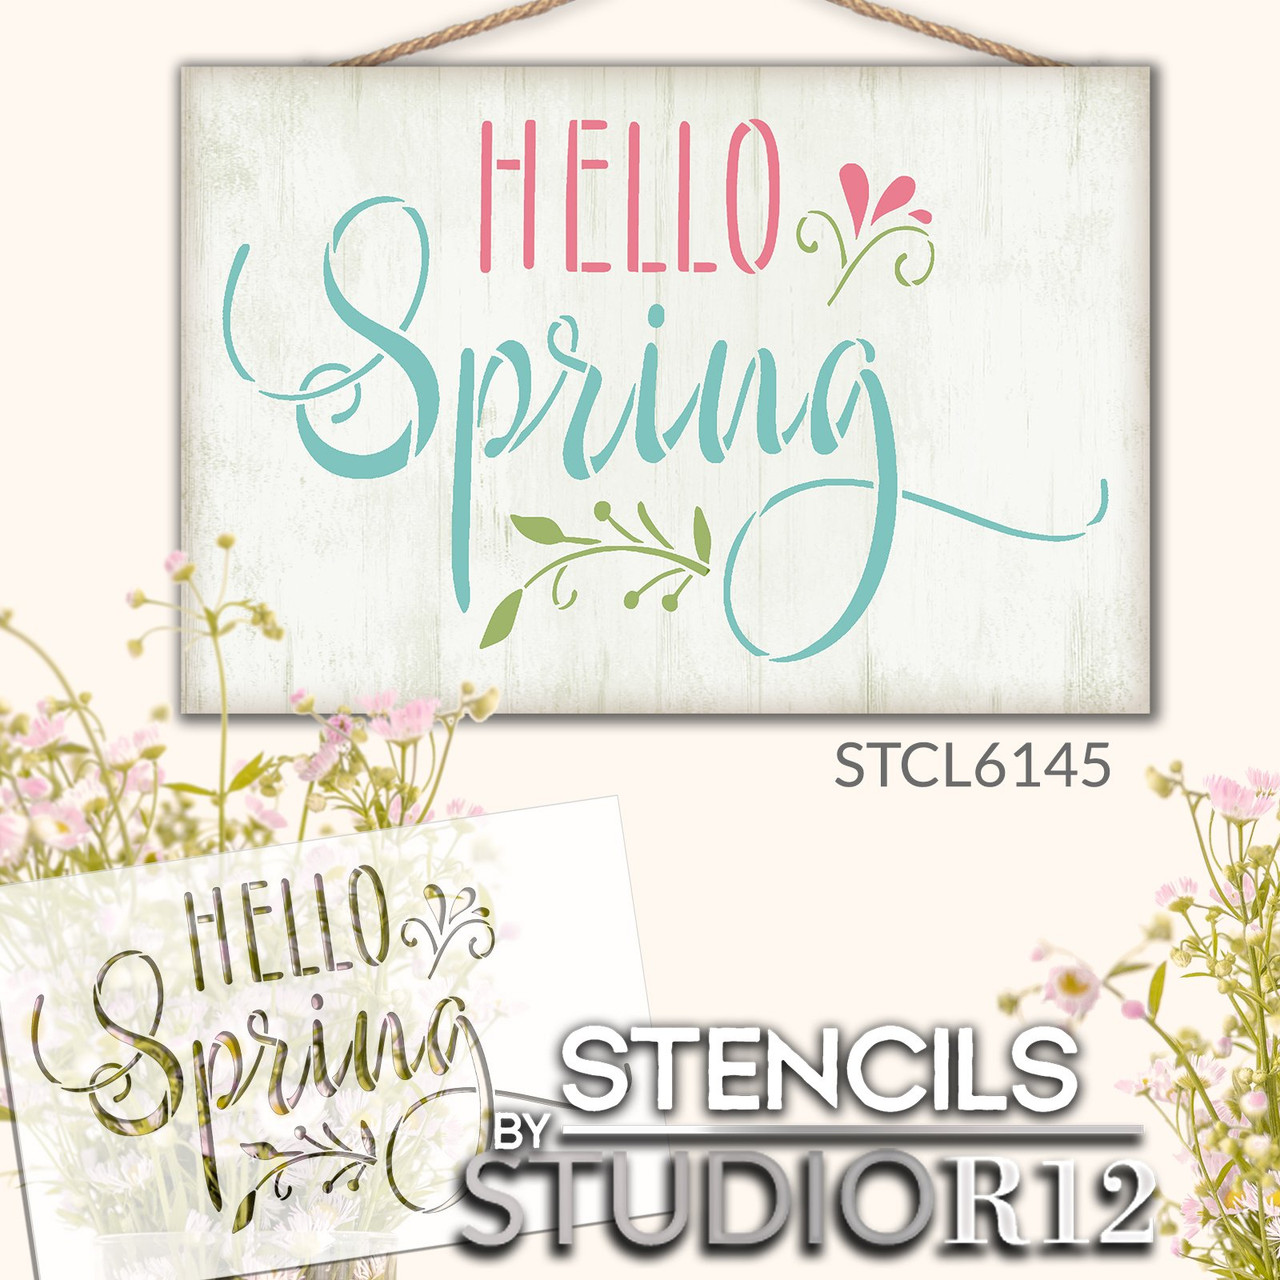 Embellished Hello Spring Stencil by StudioR12 | Craft DIY Spring Home Decor | Paint Seasonal Wood Sign | Reusable Mylar Template | Select Size